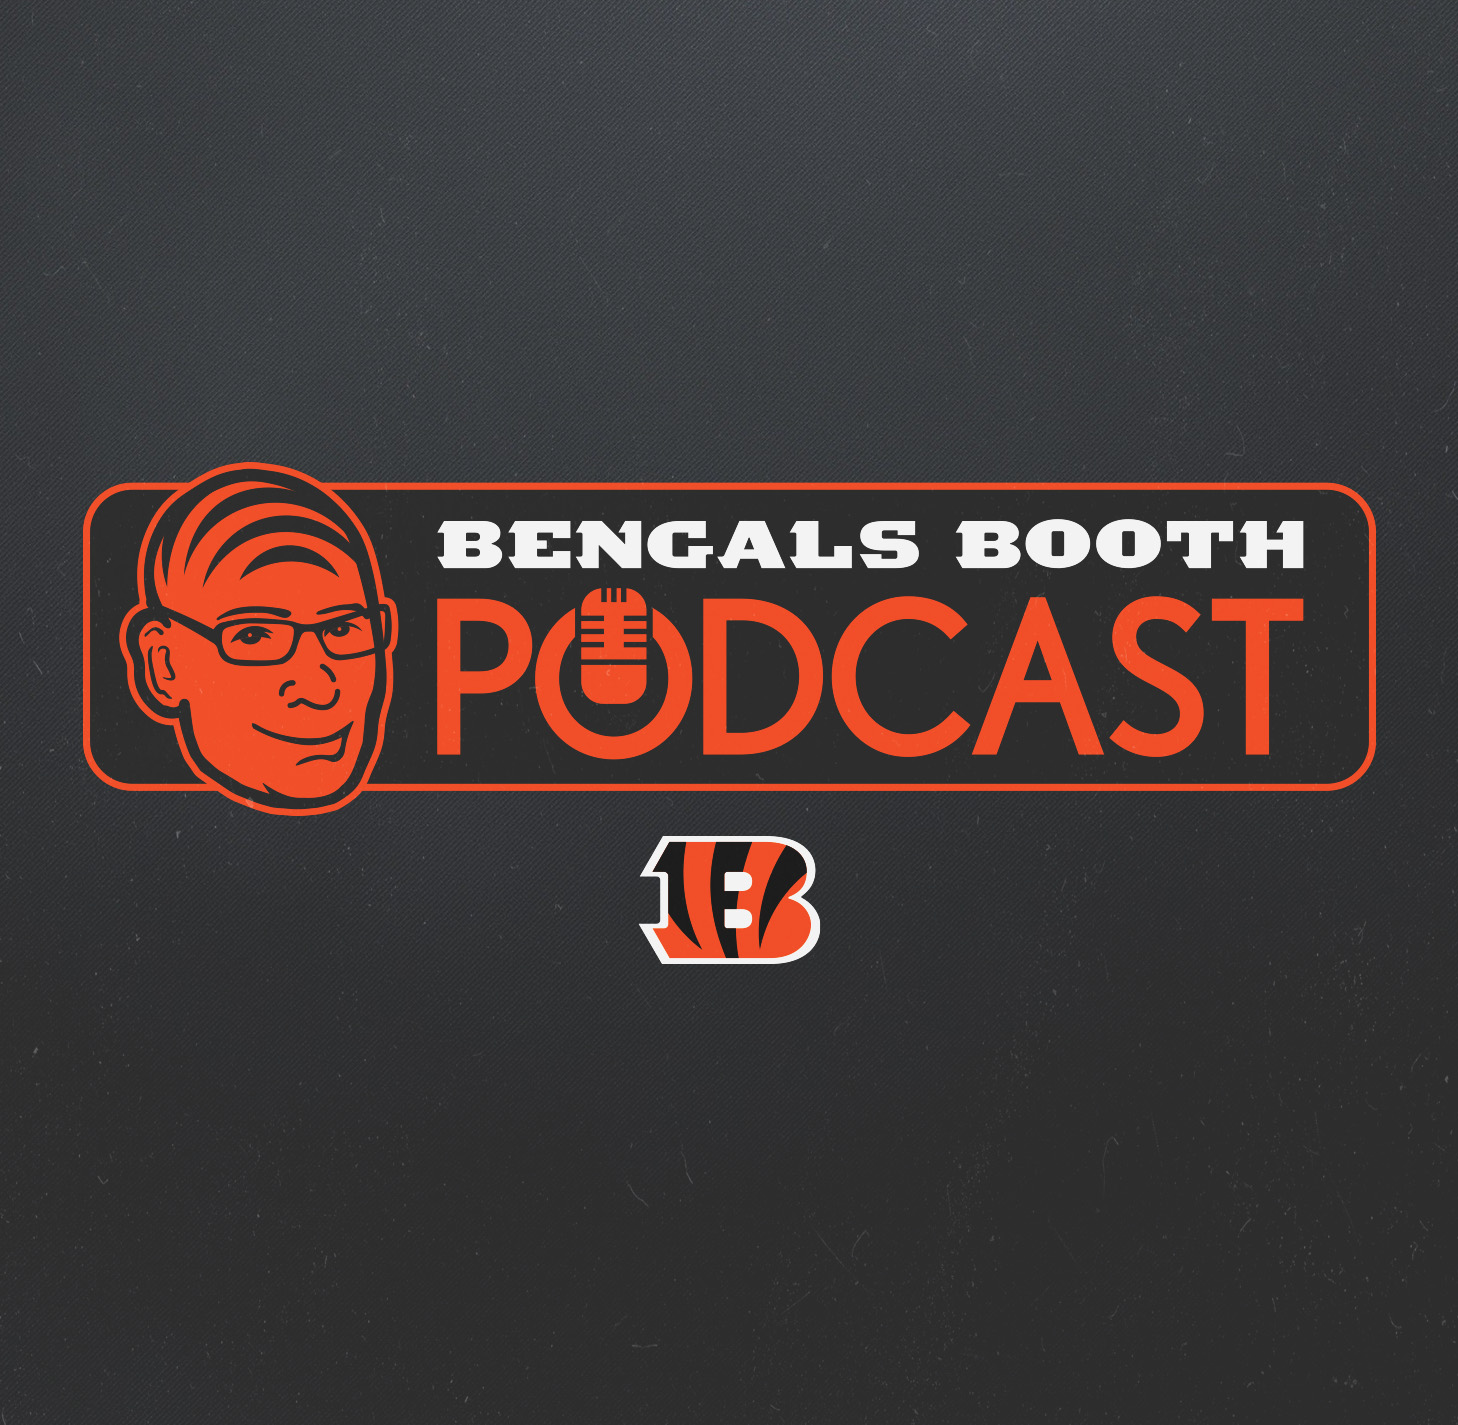 Bengals Booth Podcast: I Don't Want To Wait